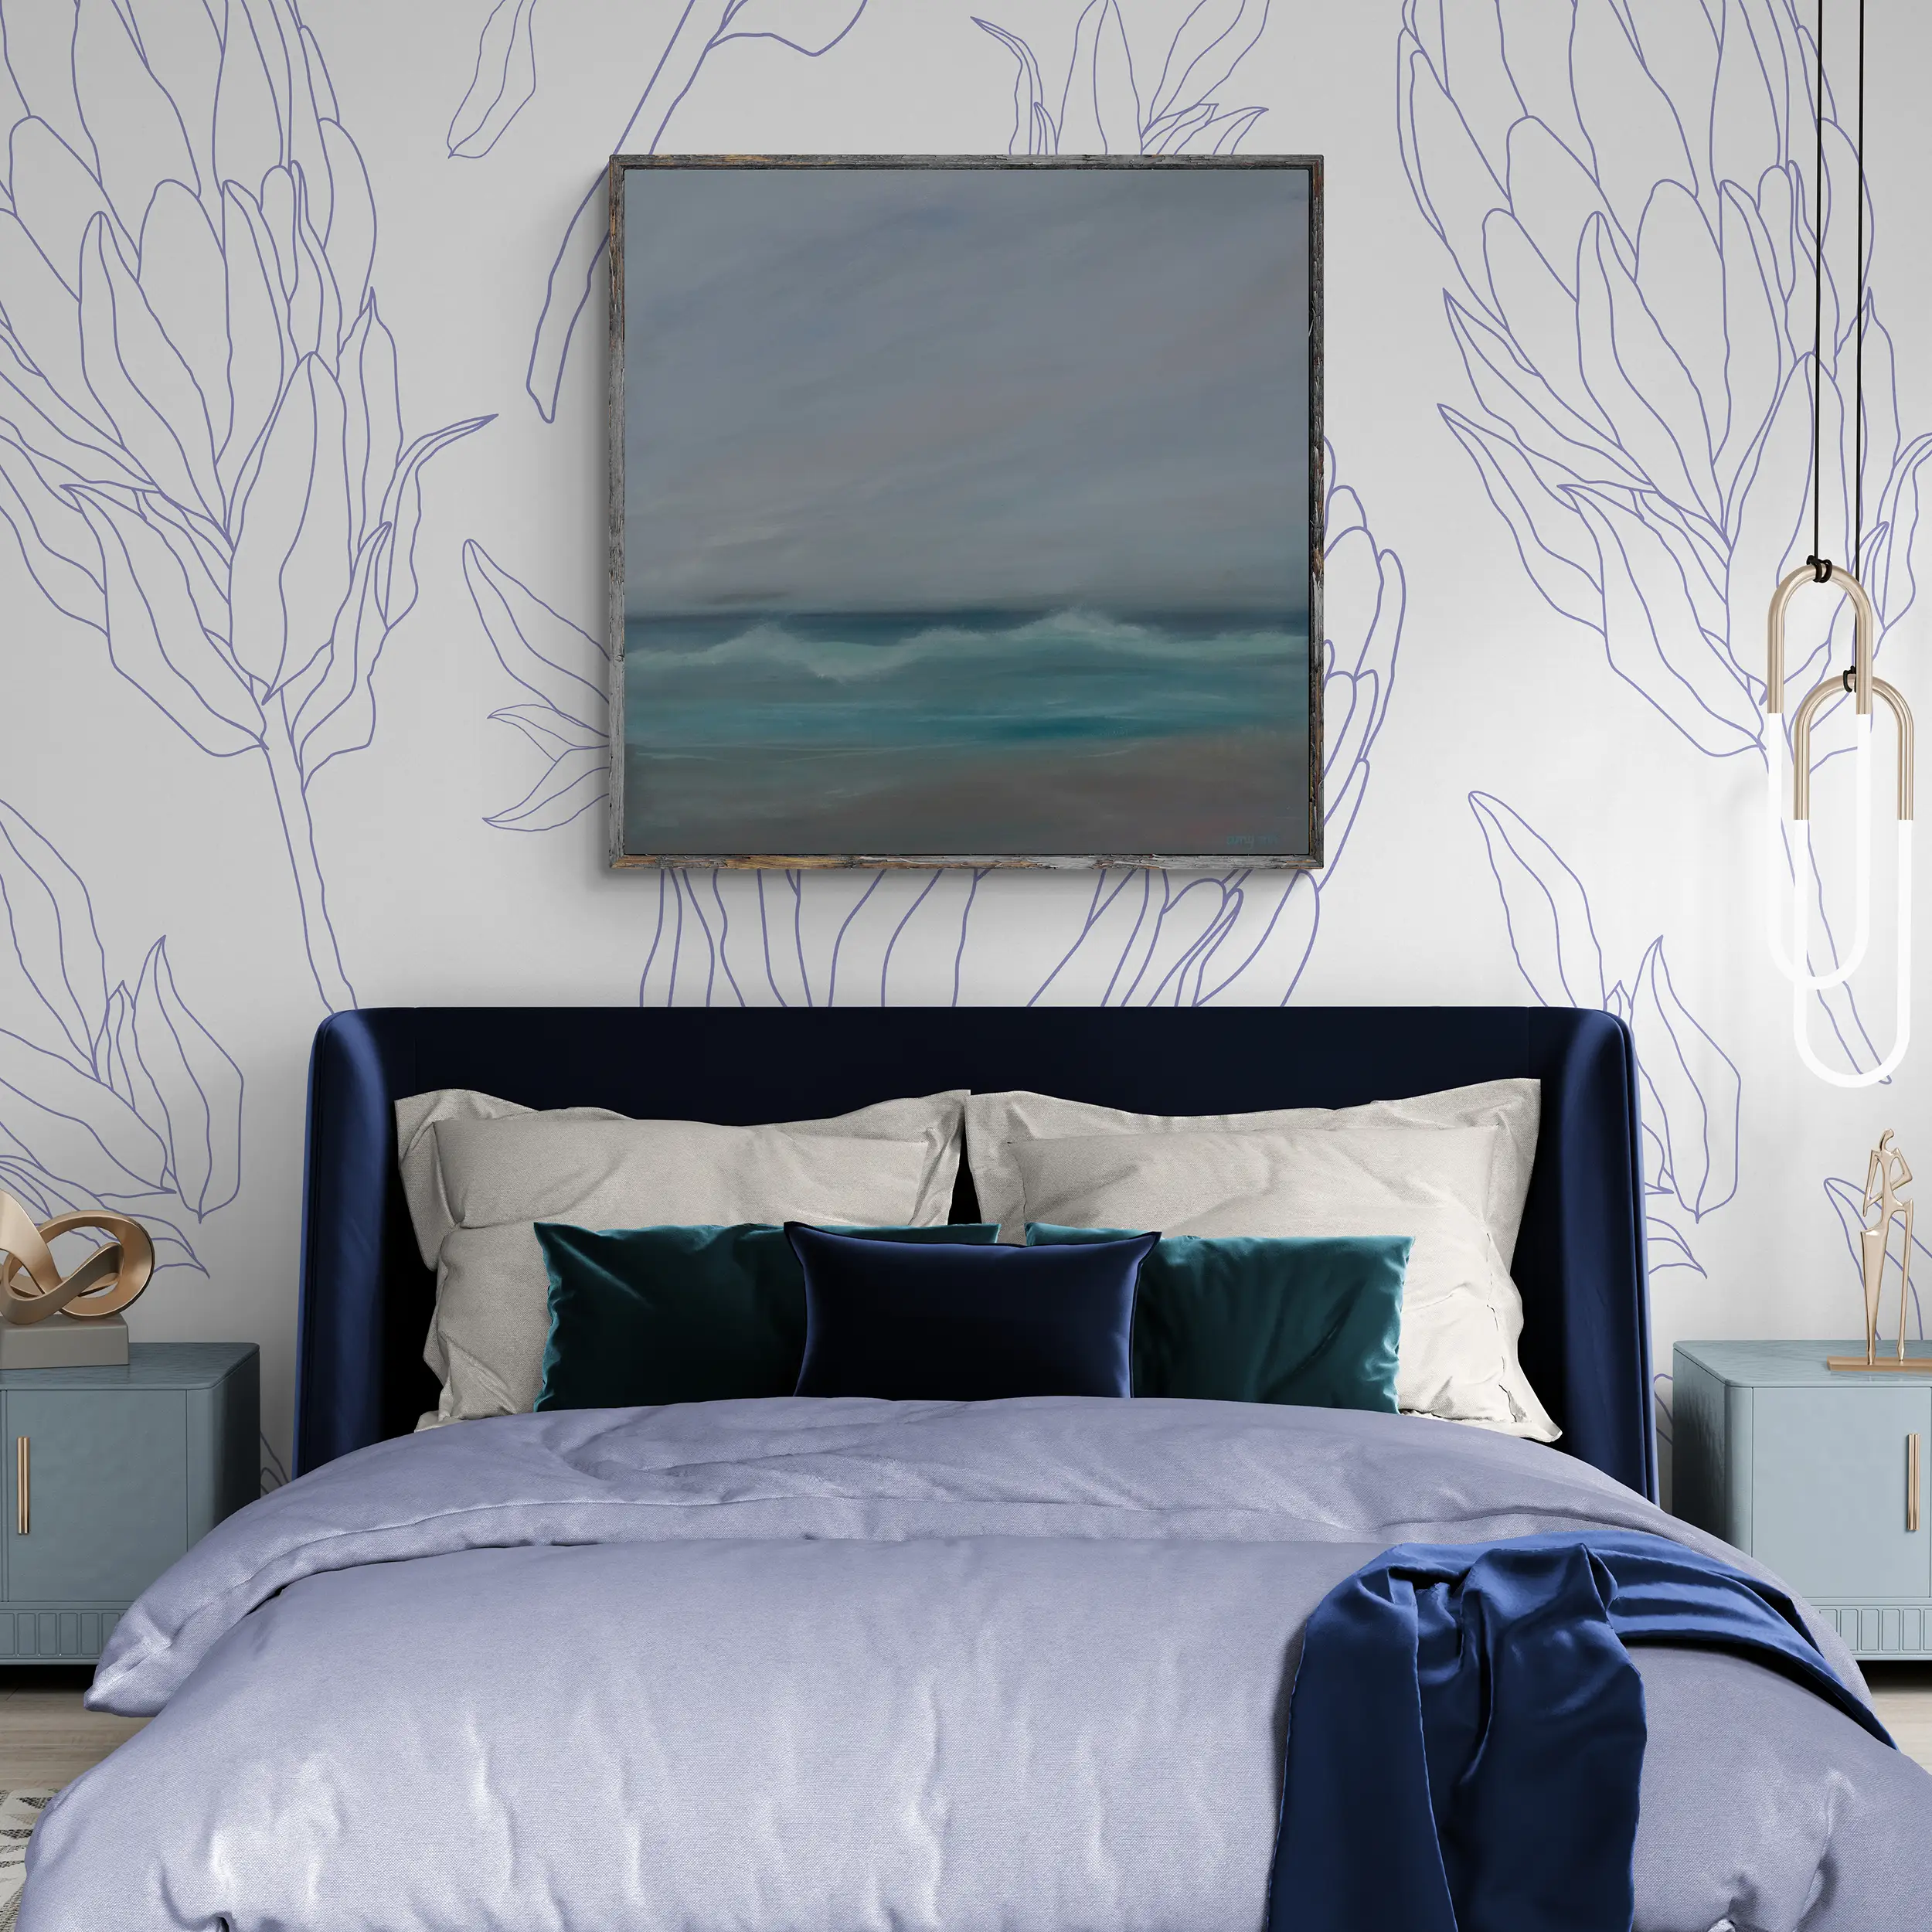 Wavesong 36x36 stylish-bedroom-with-fancy-lights Naples Art Gallery